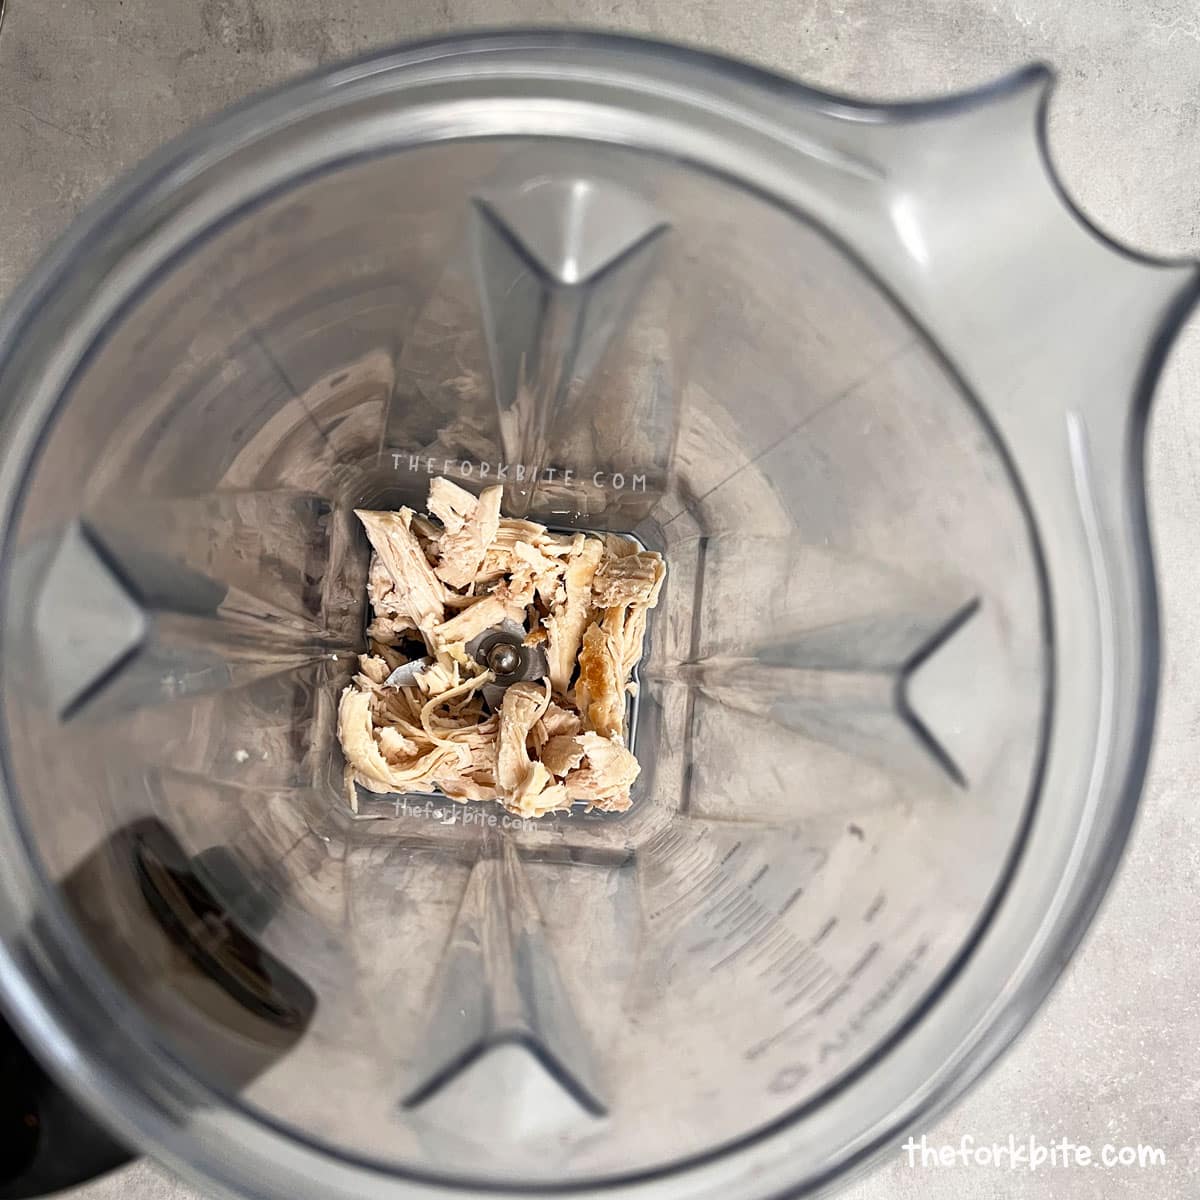 In a pinch, can you shred chicken in a blender? The answer is yes, but you must use the blender cautiously. This isn't something blenders are intended to do.